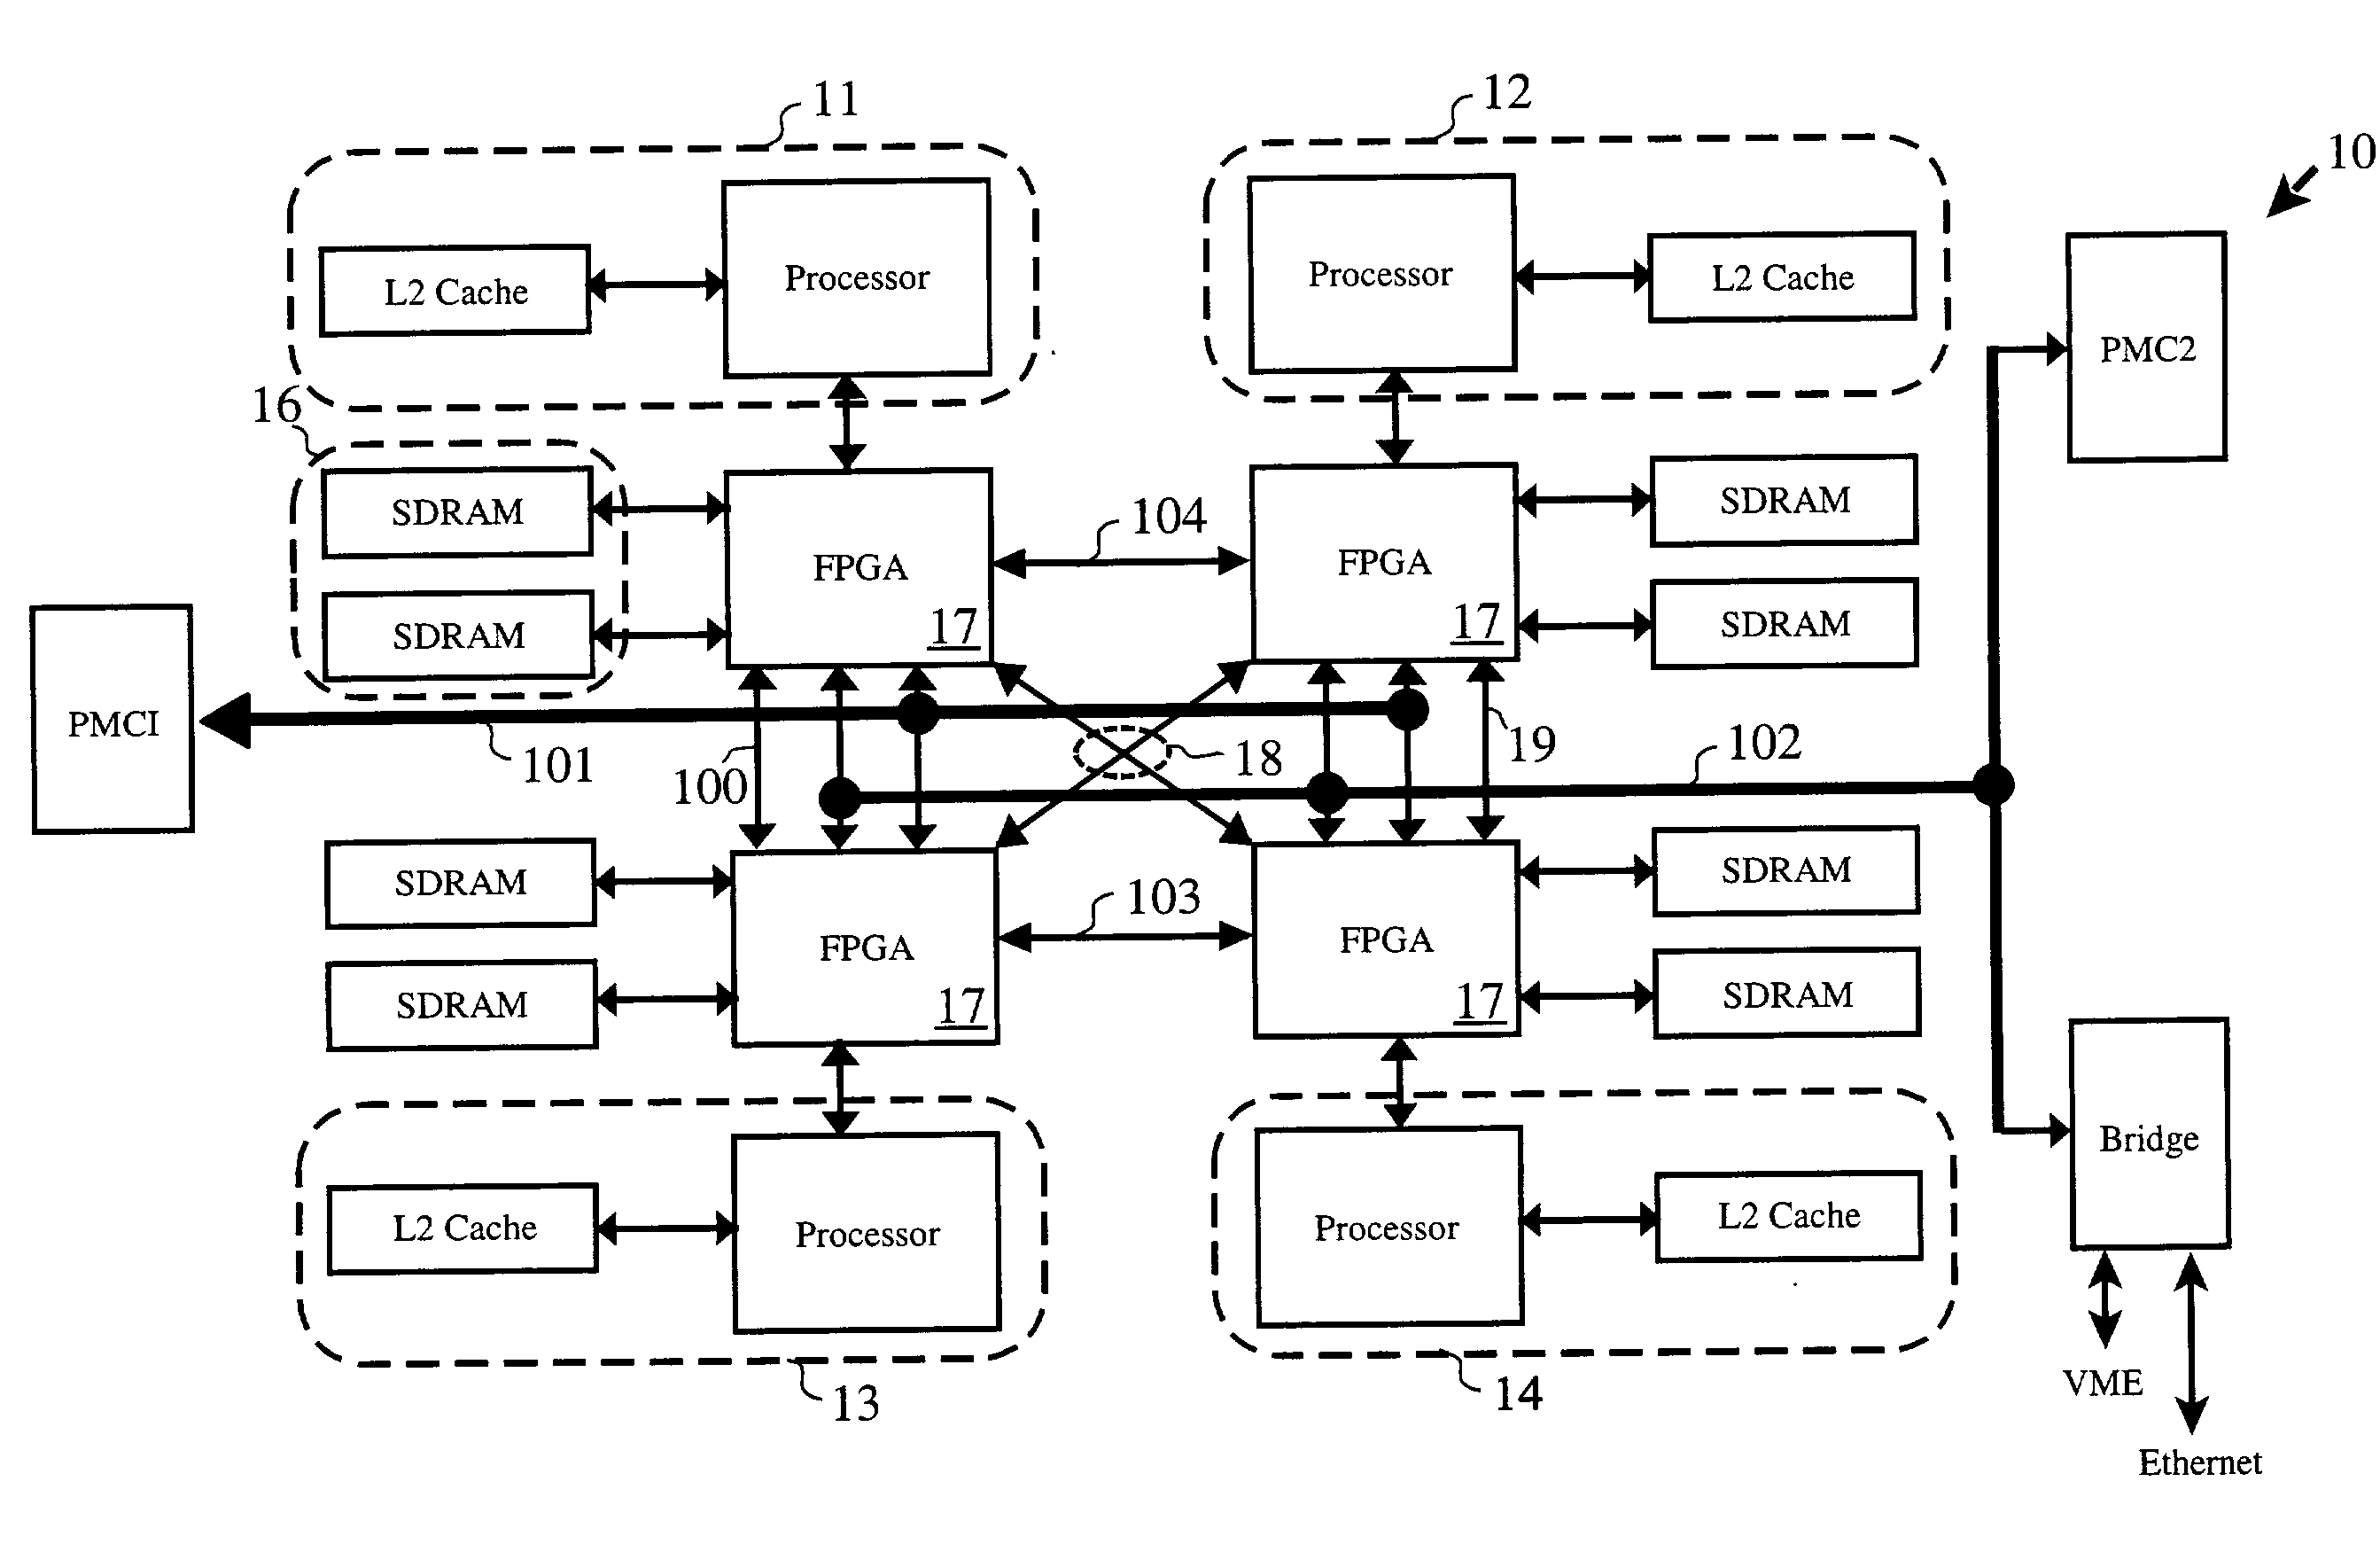 Signal processing resource for selective series processing of data in transit on communications paths in multi-processor arrangements